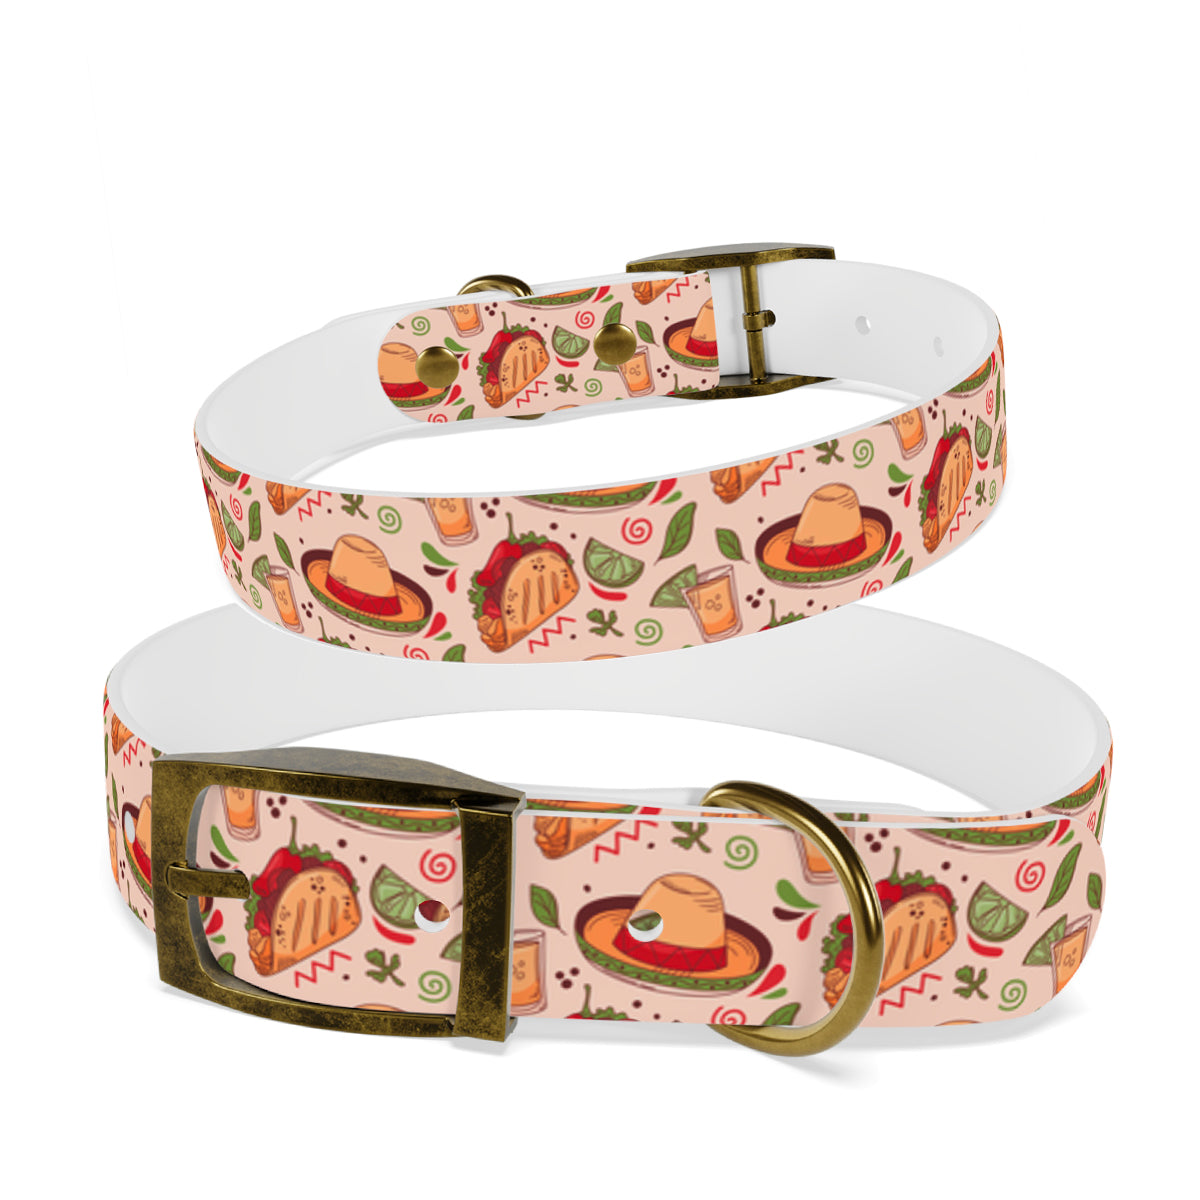 Personalized Tacos Dog Collar | Antimicrobial, Waterproof & Odor Resistant